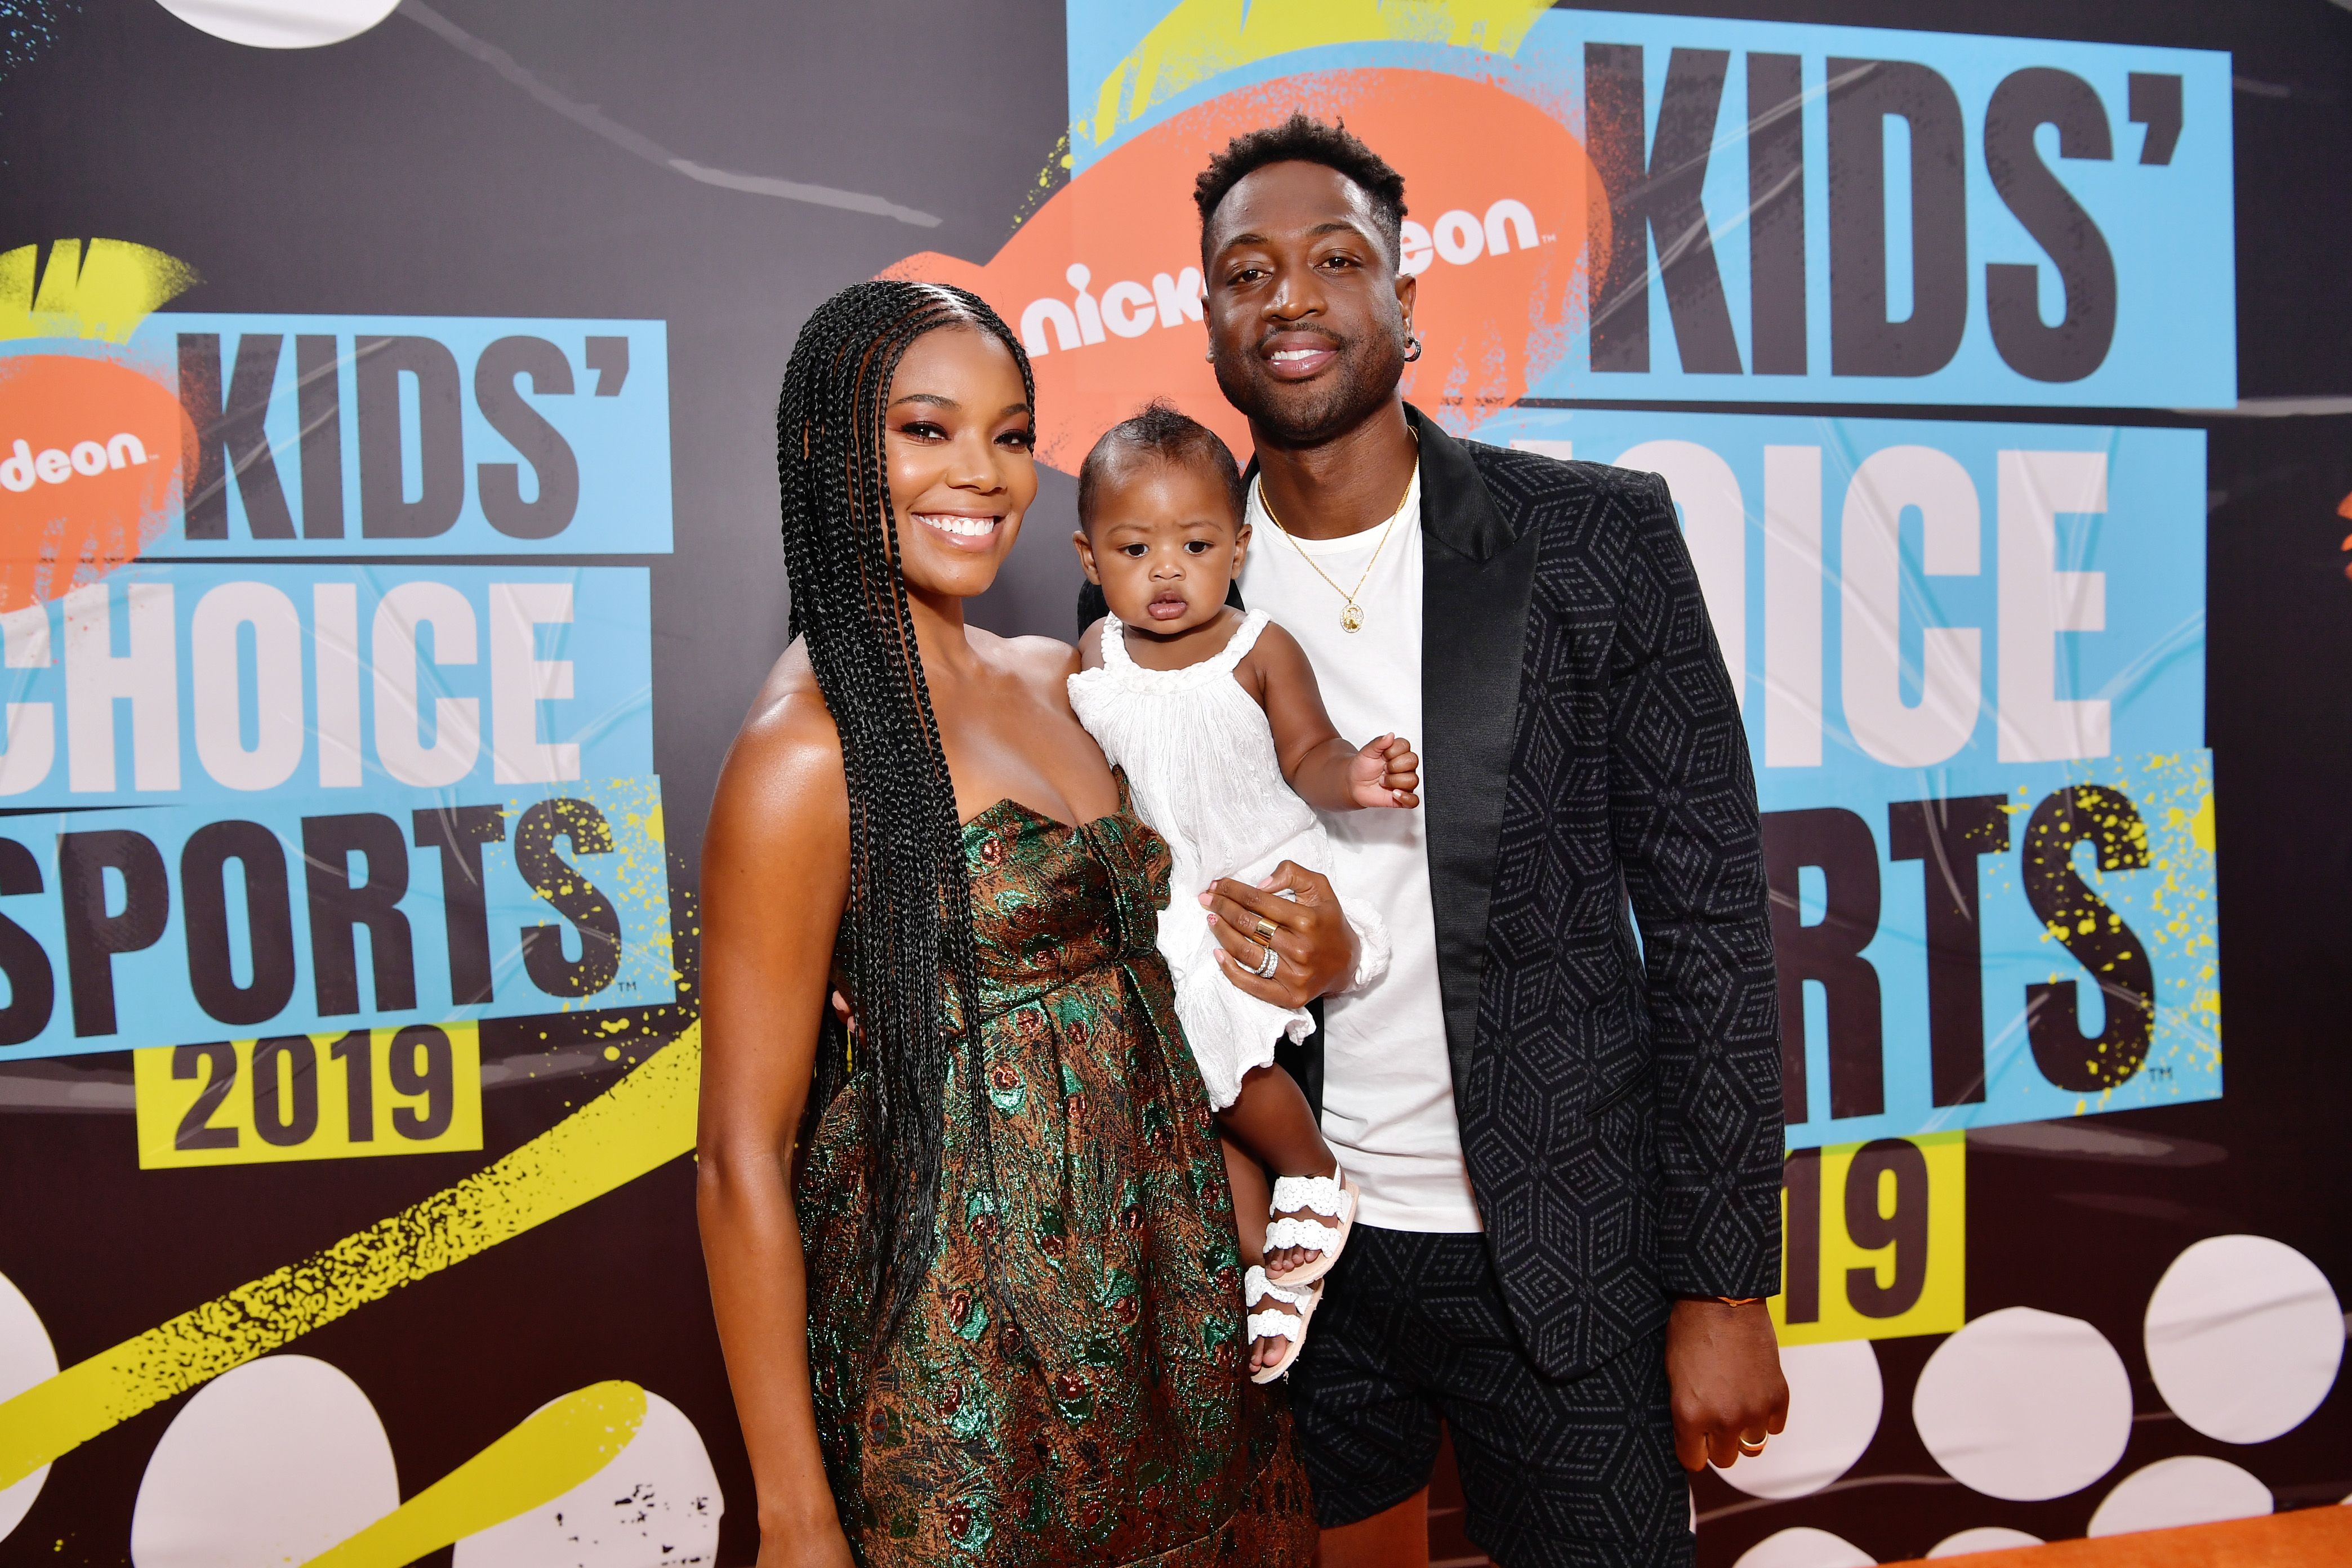 Gabrielle Union and Dwyane Wade at Nickelodeon Kids' Choice Sports 2019 at Barker Hangar on July 11, 2019 | Photo: Getty Images